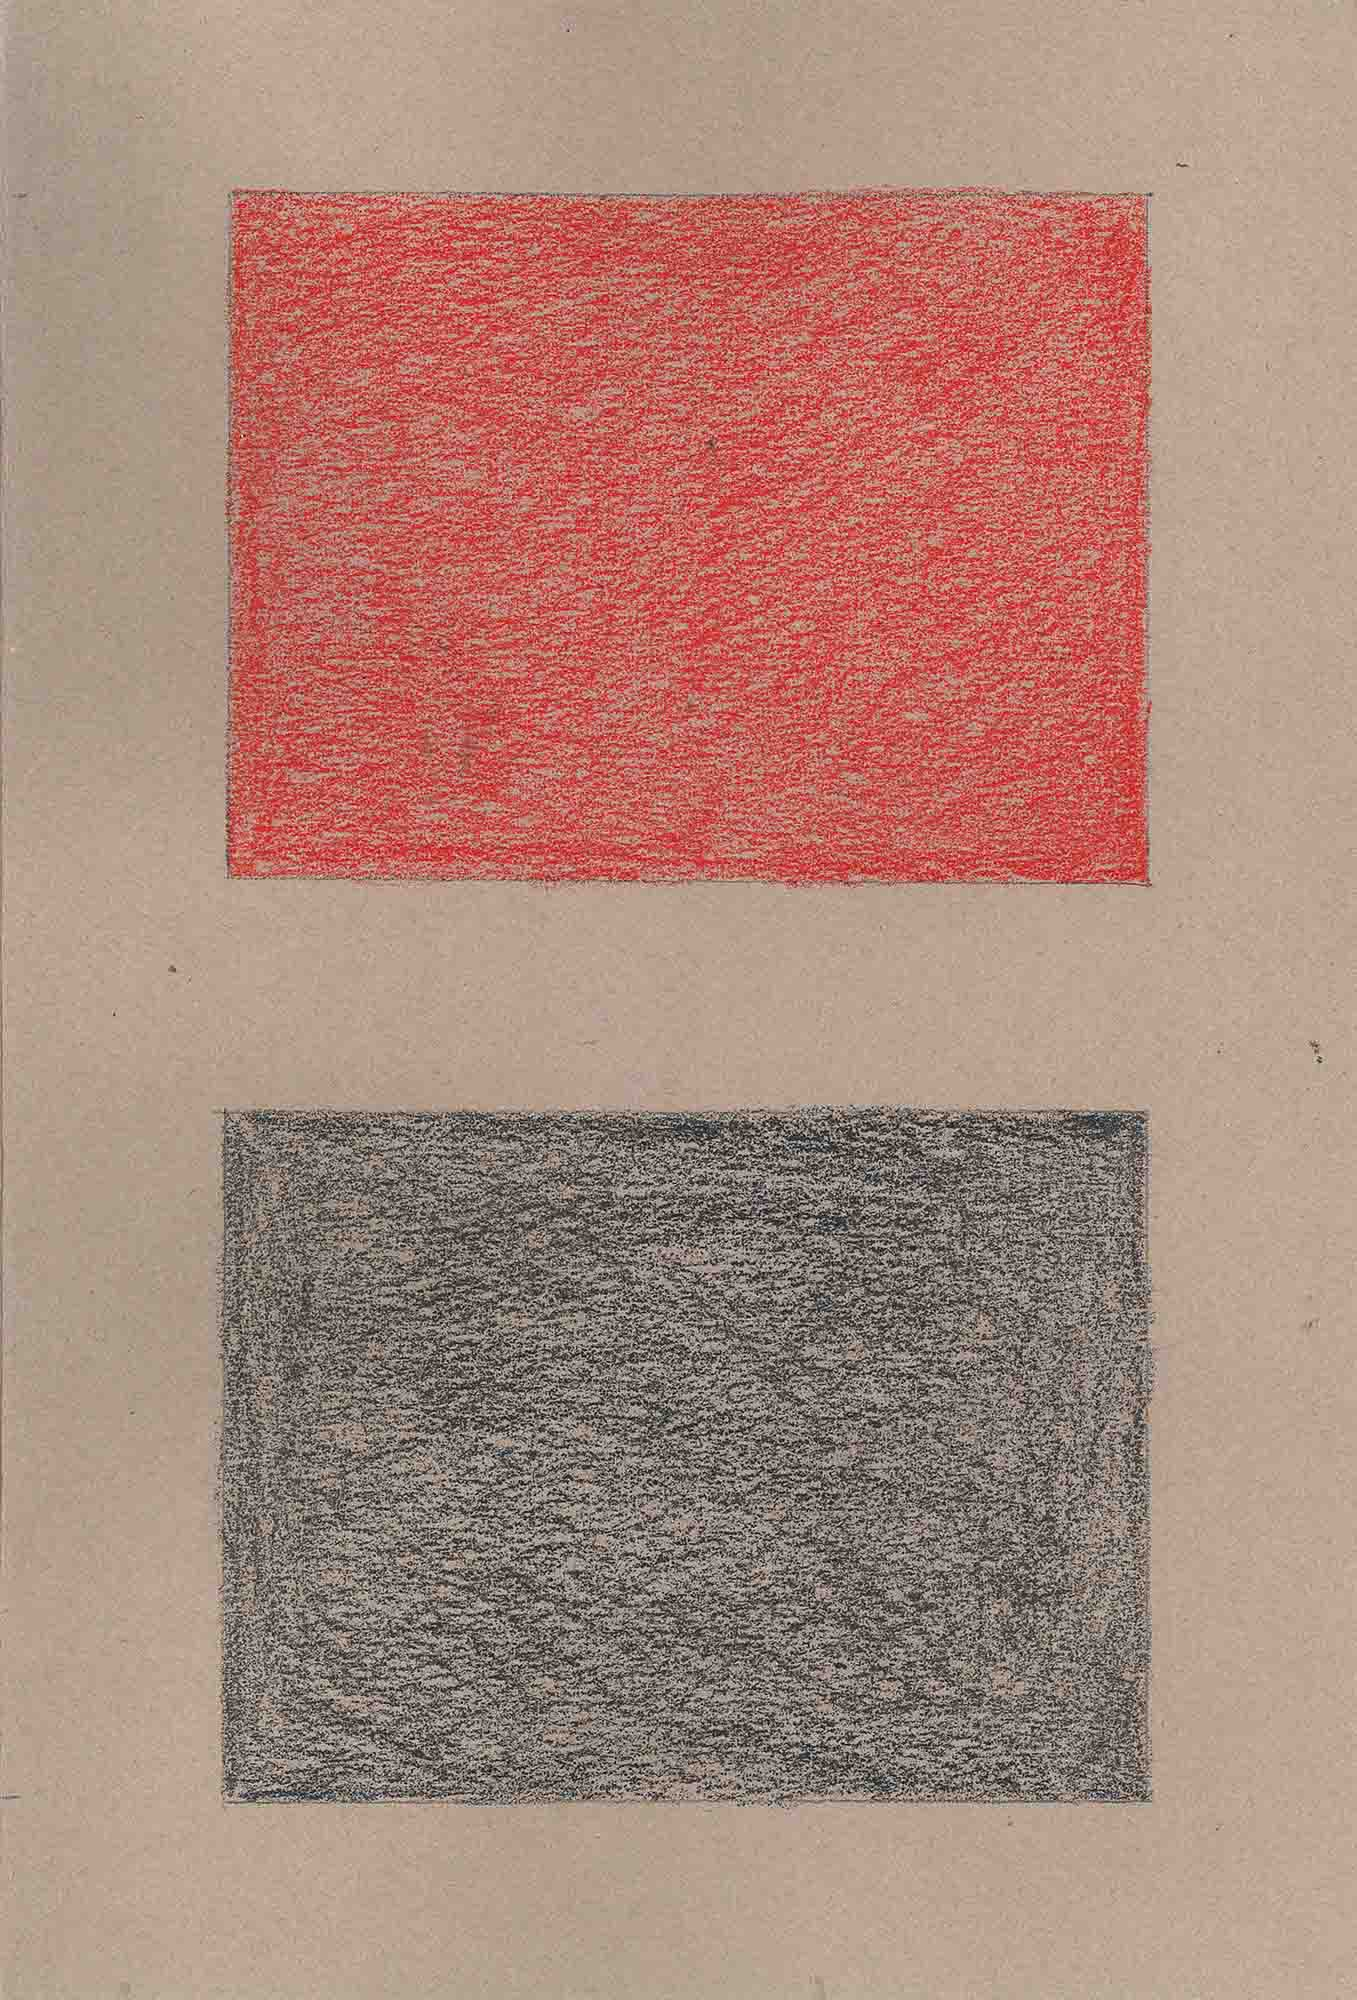 Photo of a graphite and colour pencil drawing exploring the interaction of colour